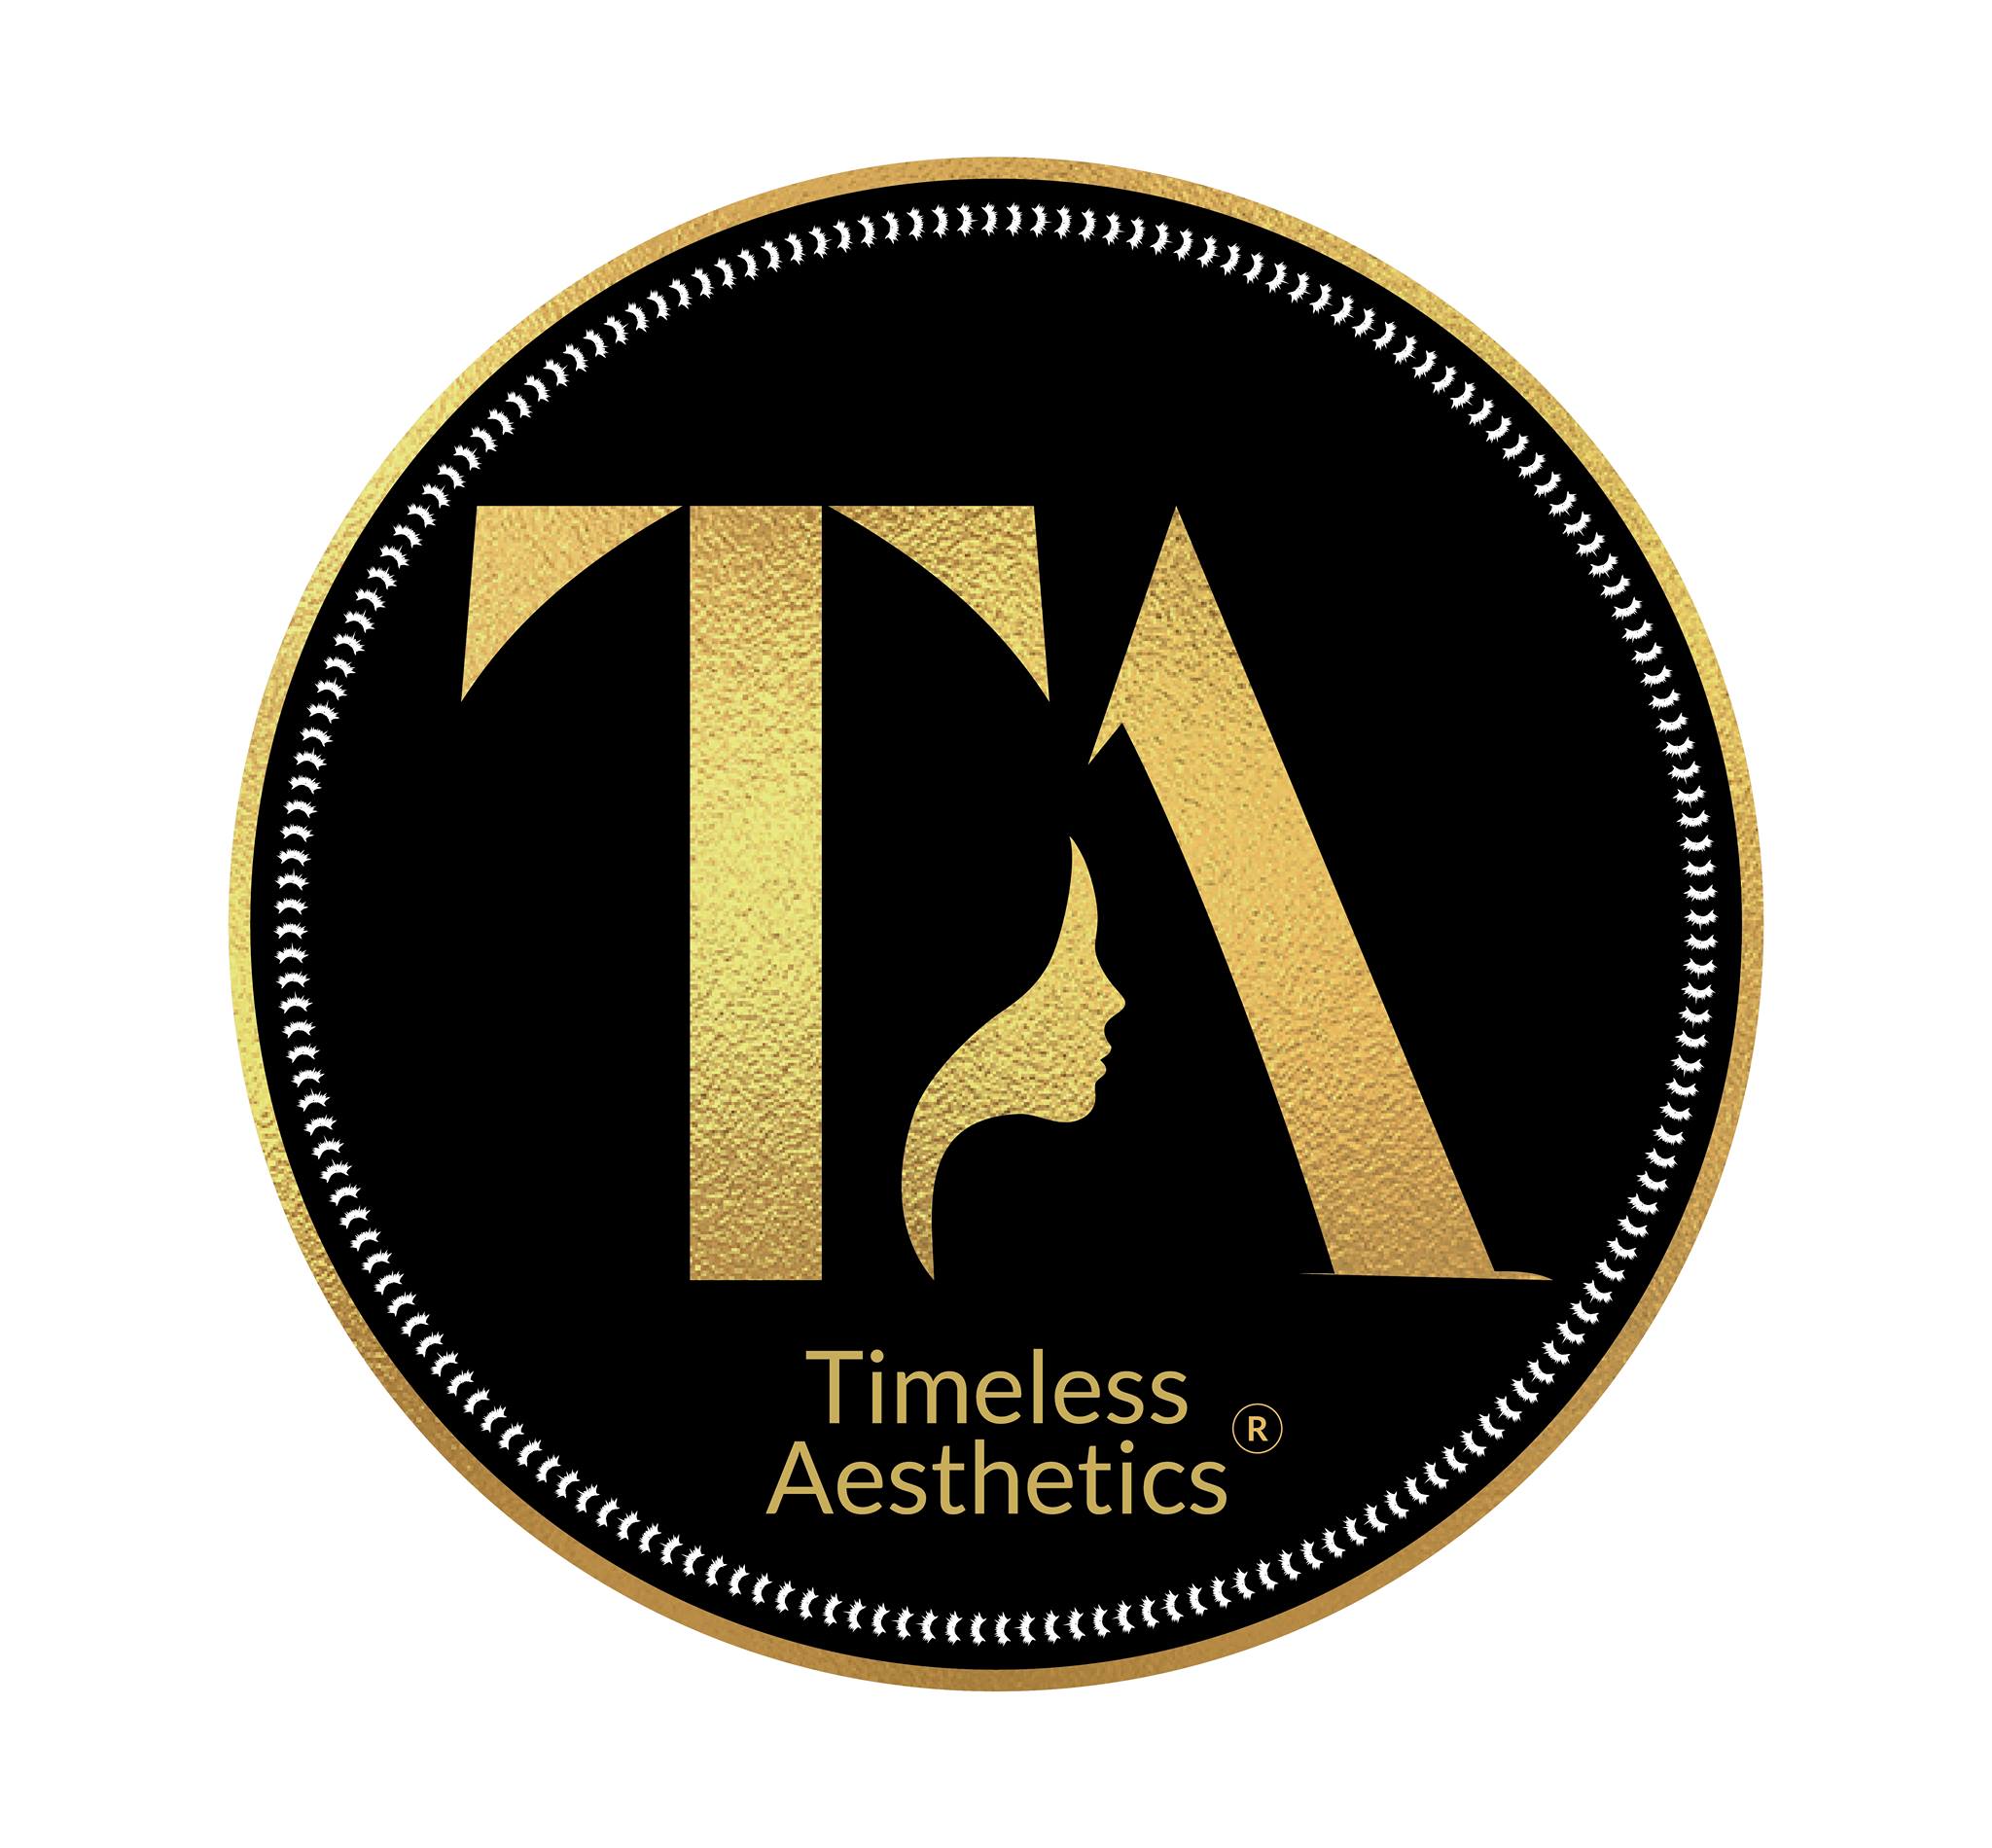 Timeless Aesthetics|IT Services|Professional Services